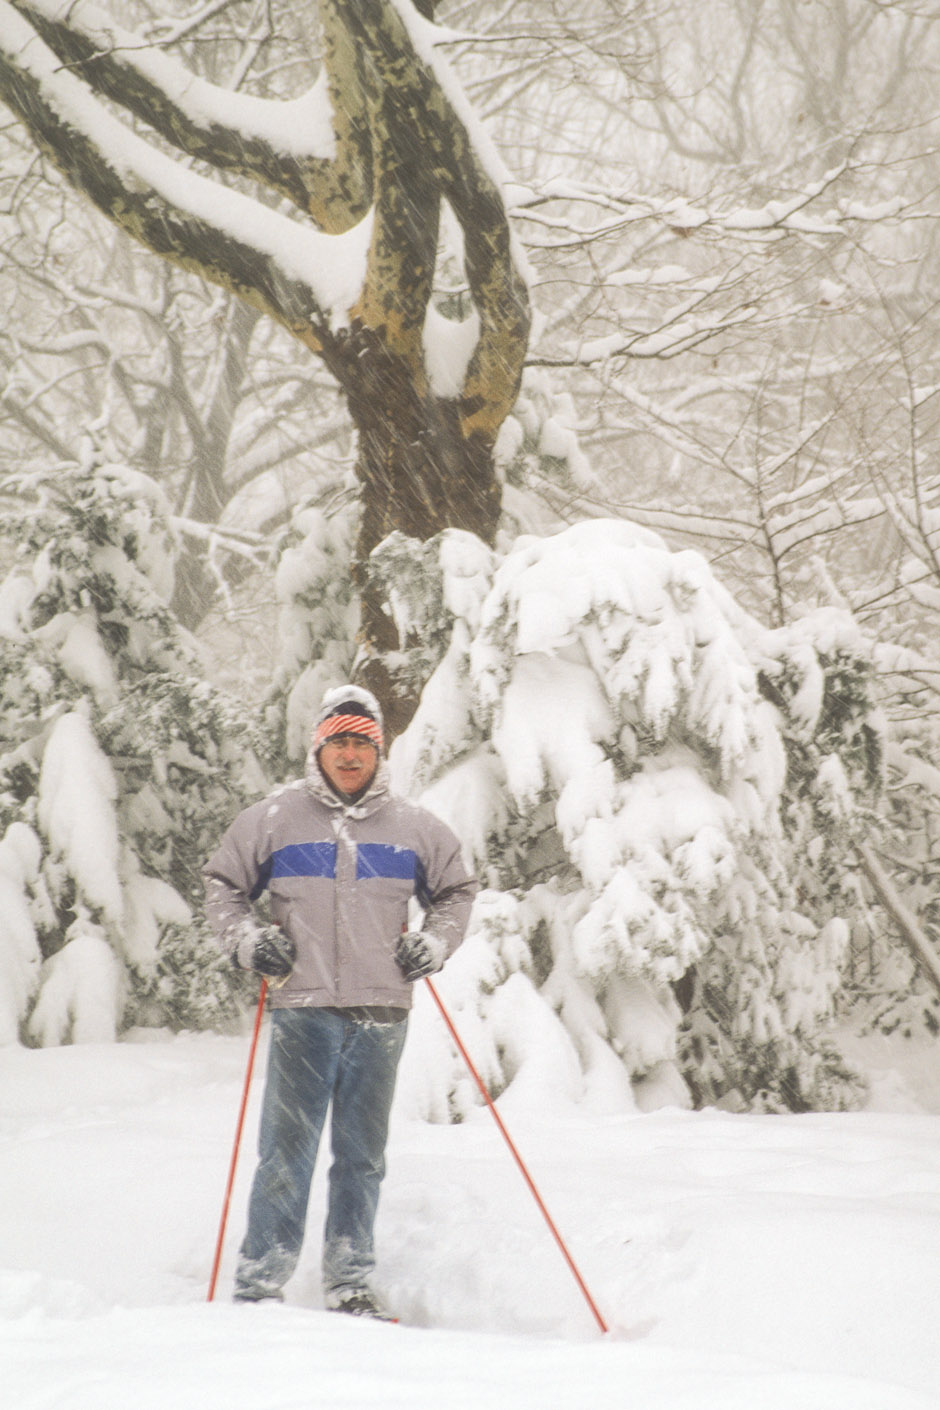 NYC Blizzard of 2000 –